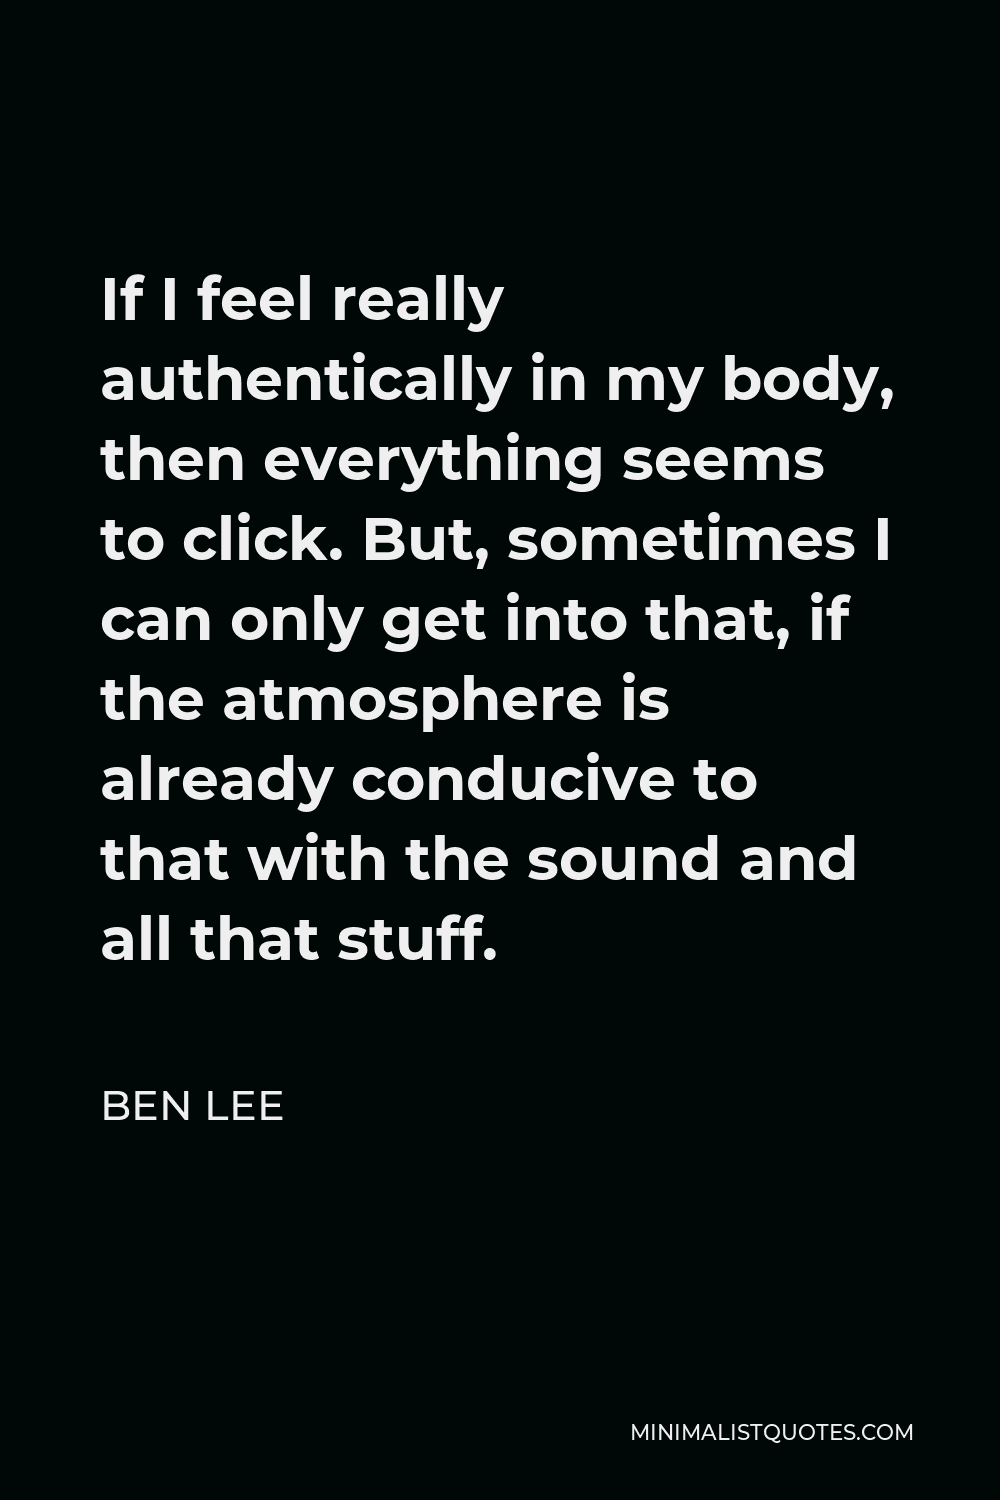 Ben Lee Quote - If I feel really authentically in my body, then everything seems to click. But, sometimes I can only get into that, if the atmosphere is already conducive to that with the sound and all that stuff.